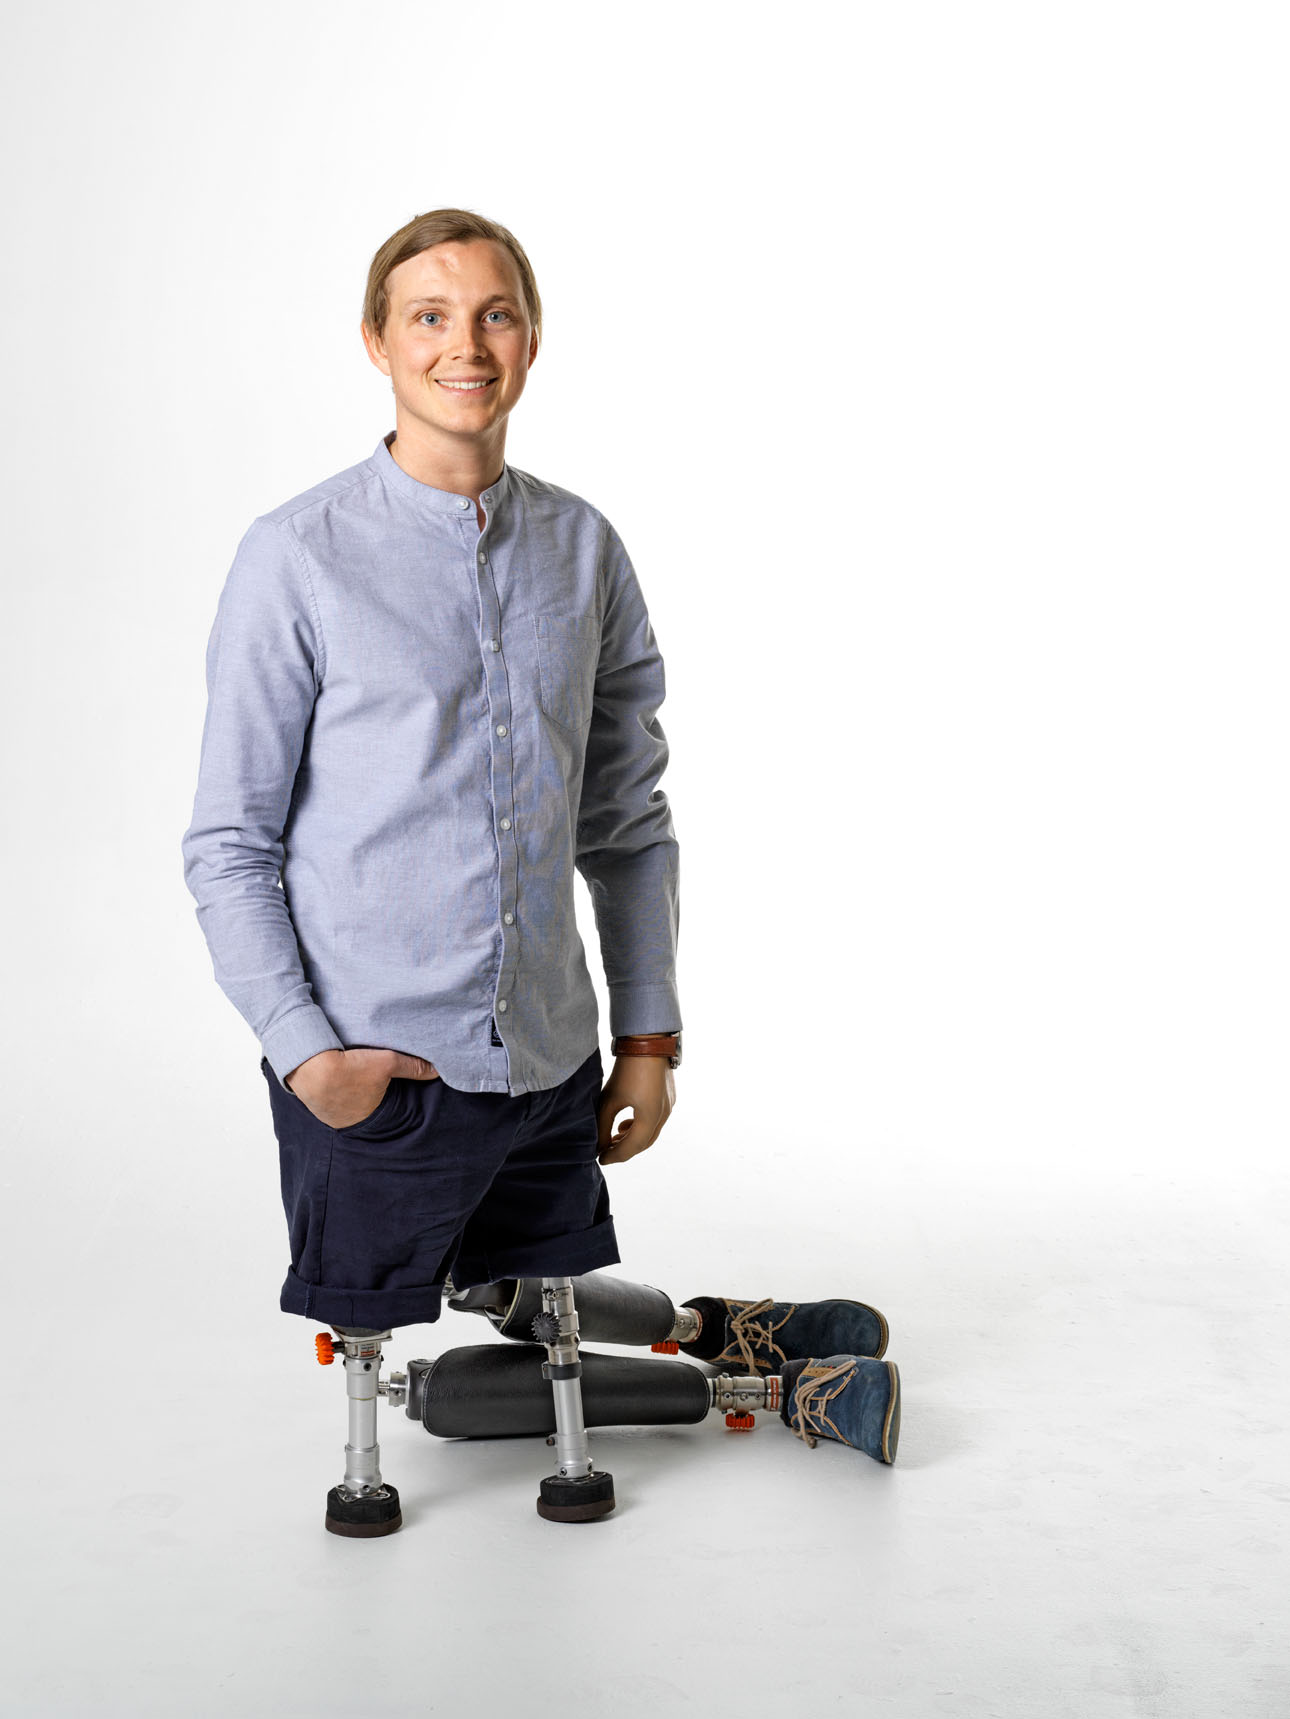 Christoffer Lindhe in a blue shirt with shorts standing on his short prosthetic legs with Xtend Connect attached